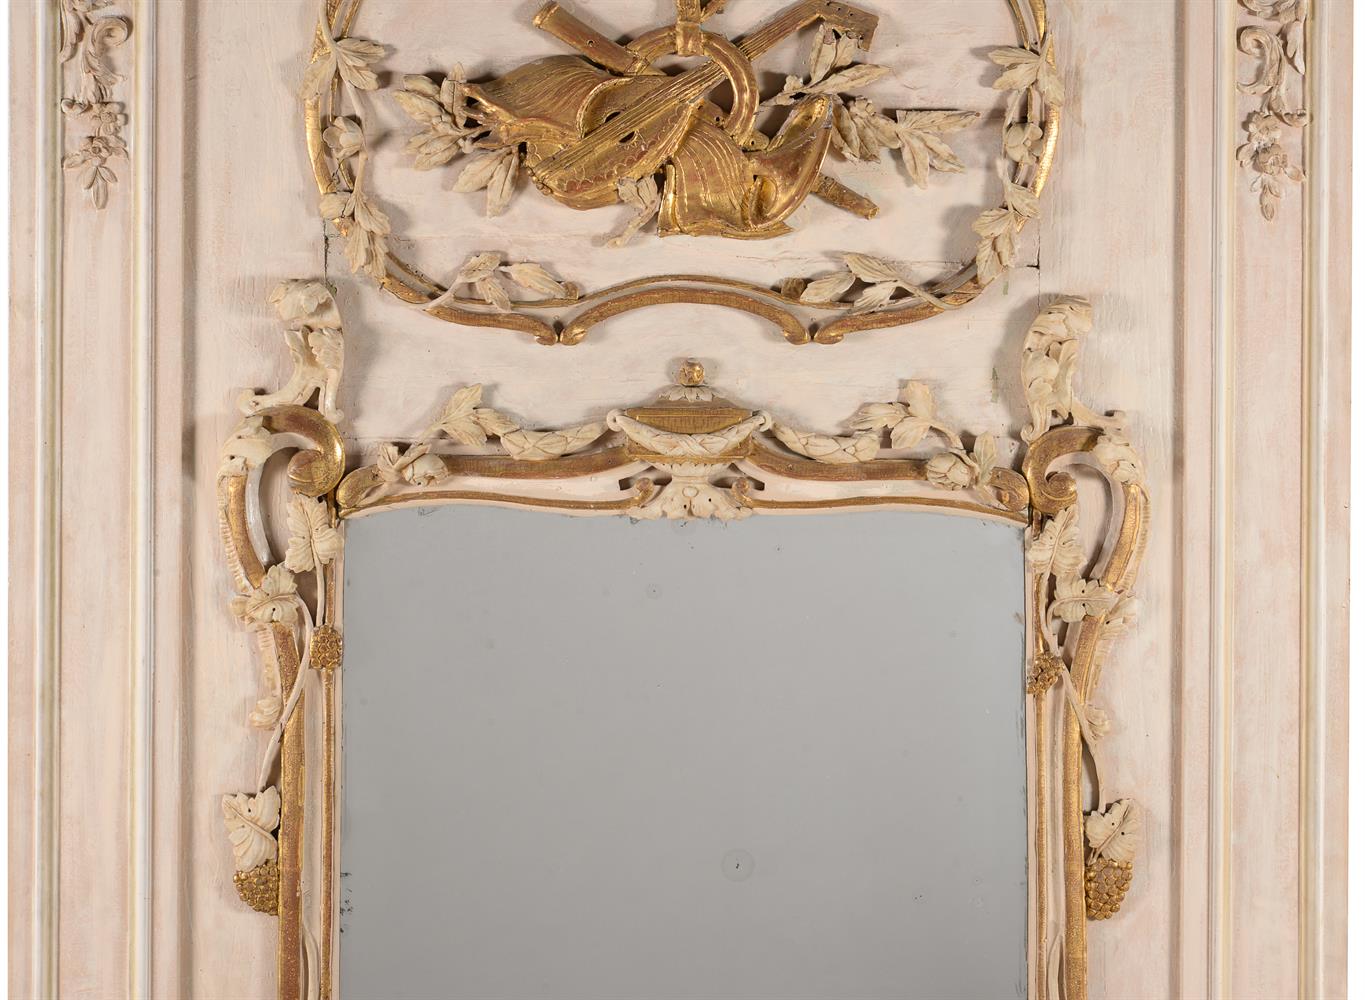 A FRENCH CREAM PAINTED AND PARCEL GILT WALL MIRROR, CIRCA 1770 & LATER - Image 3 of 6